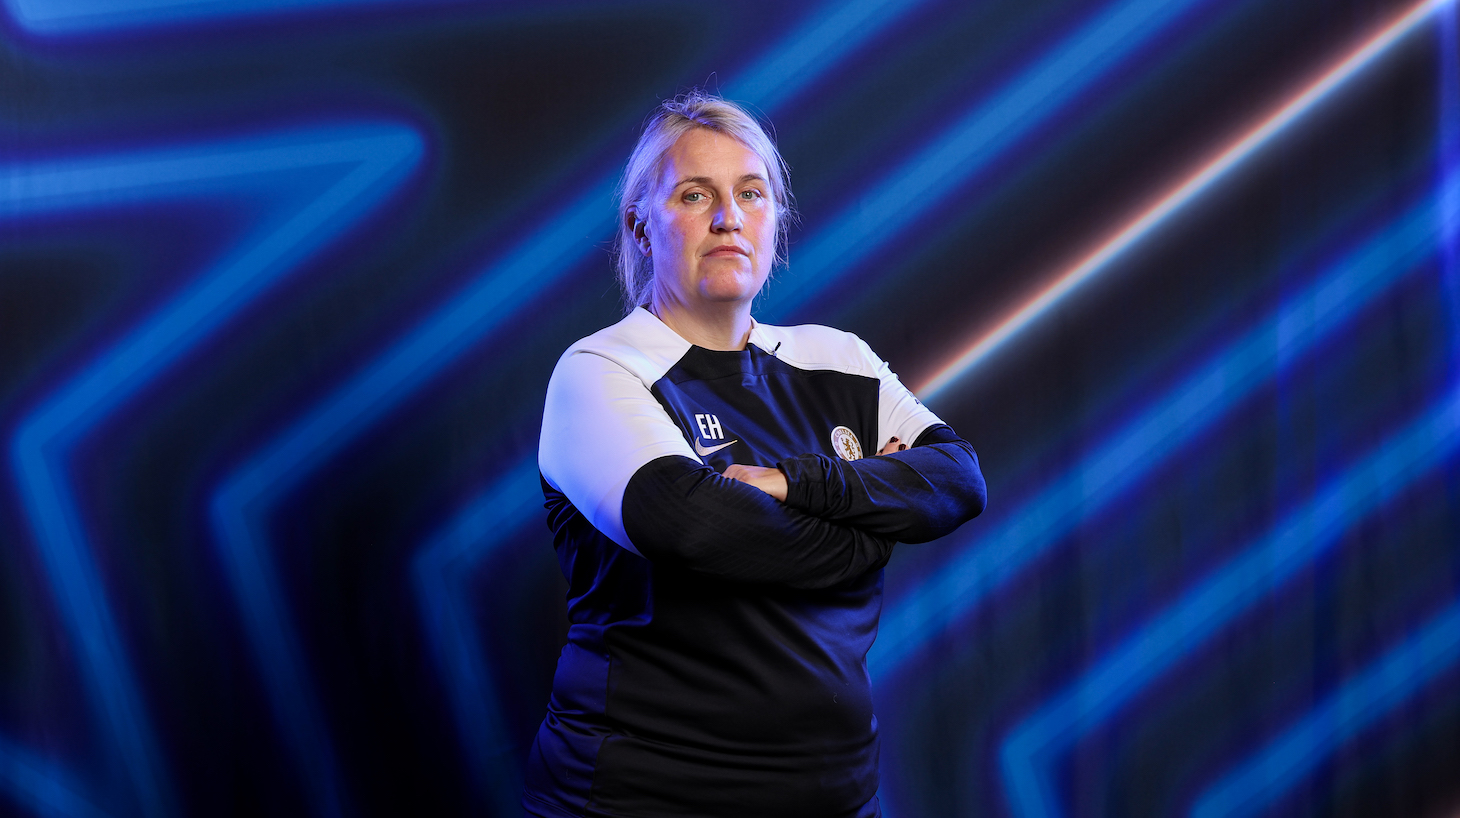 Emma Hayes, Head Coach of Chelsea FC poses for a portrait during the UEFA Women's Champions League Official Portraits shoot on October 17, 2023 in Cobham, England.